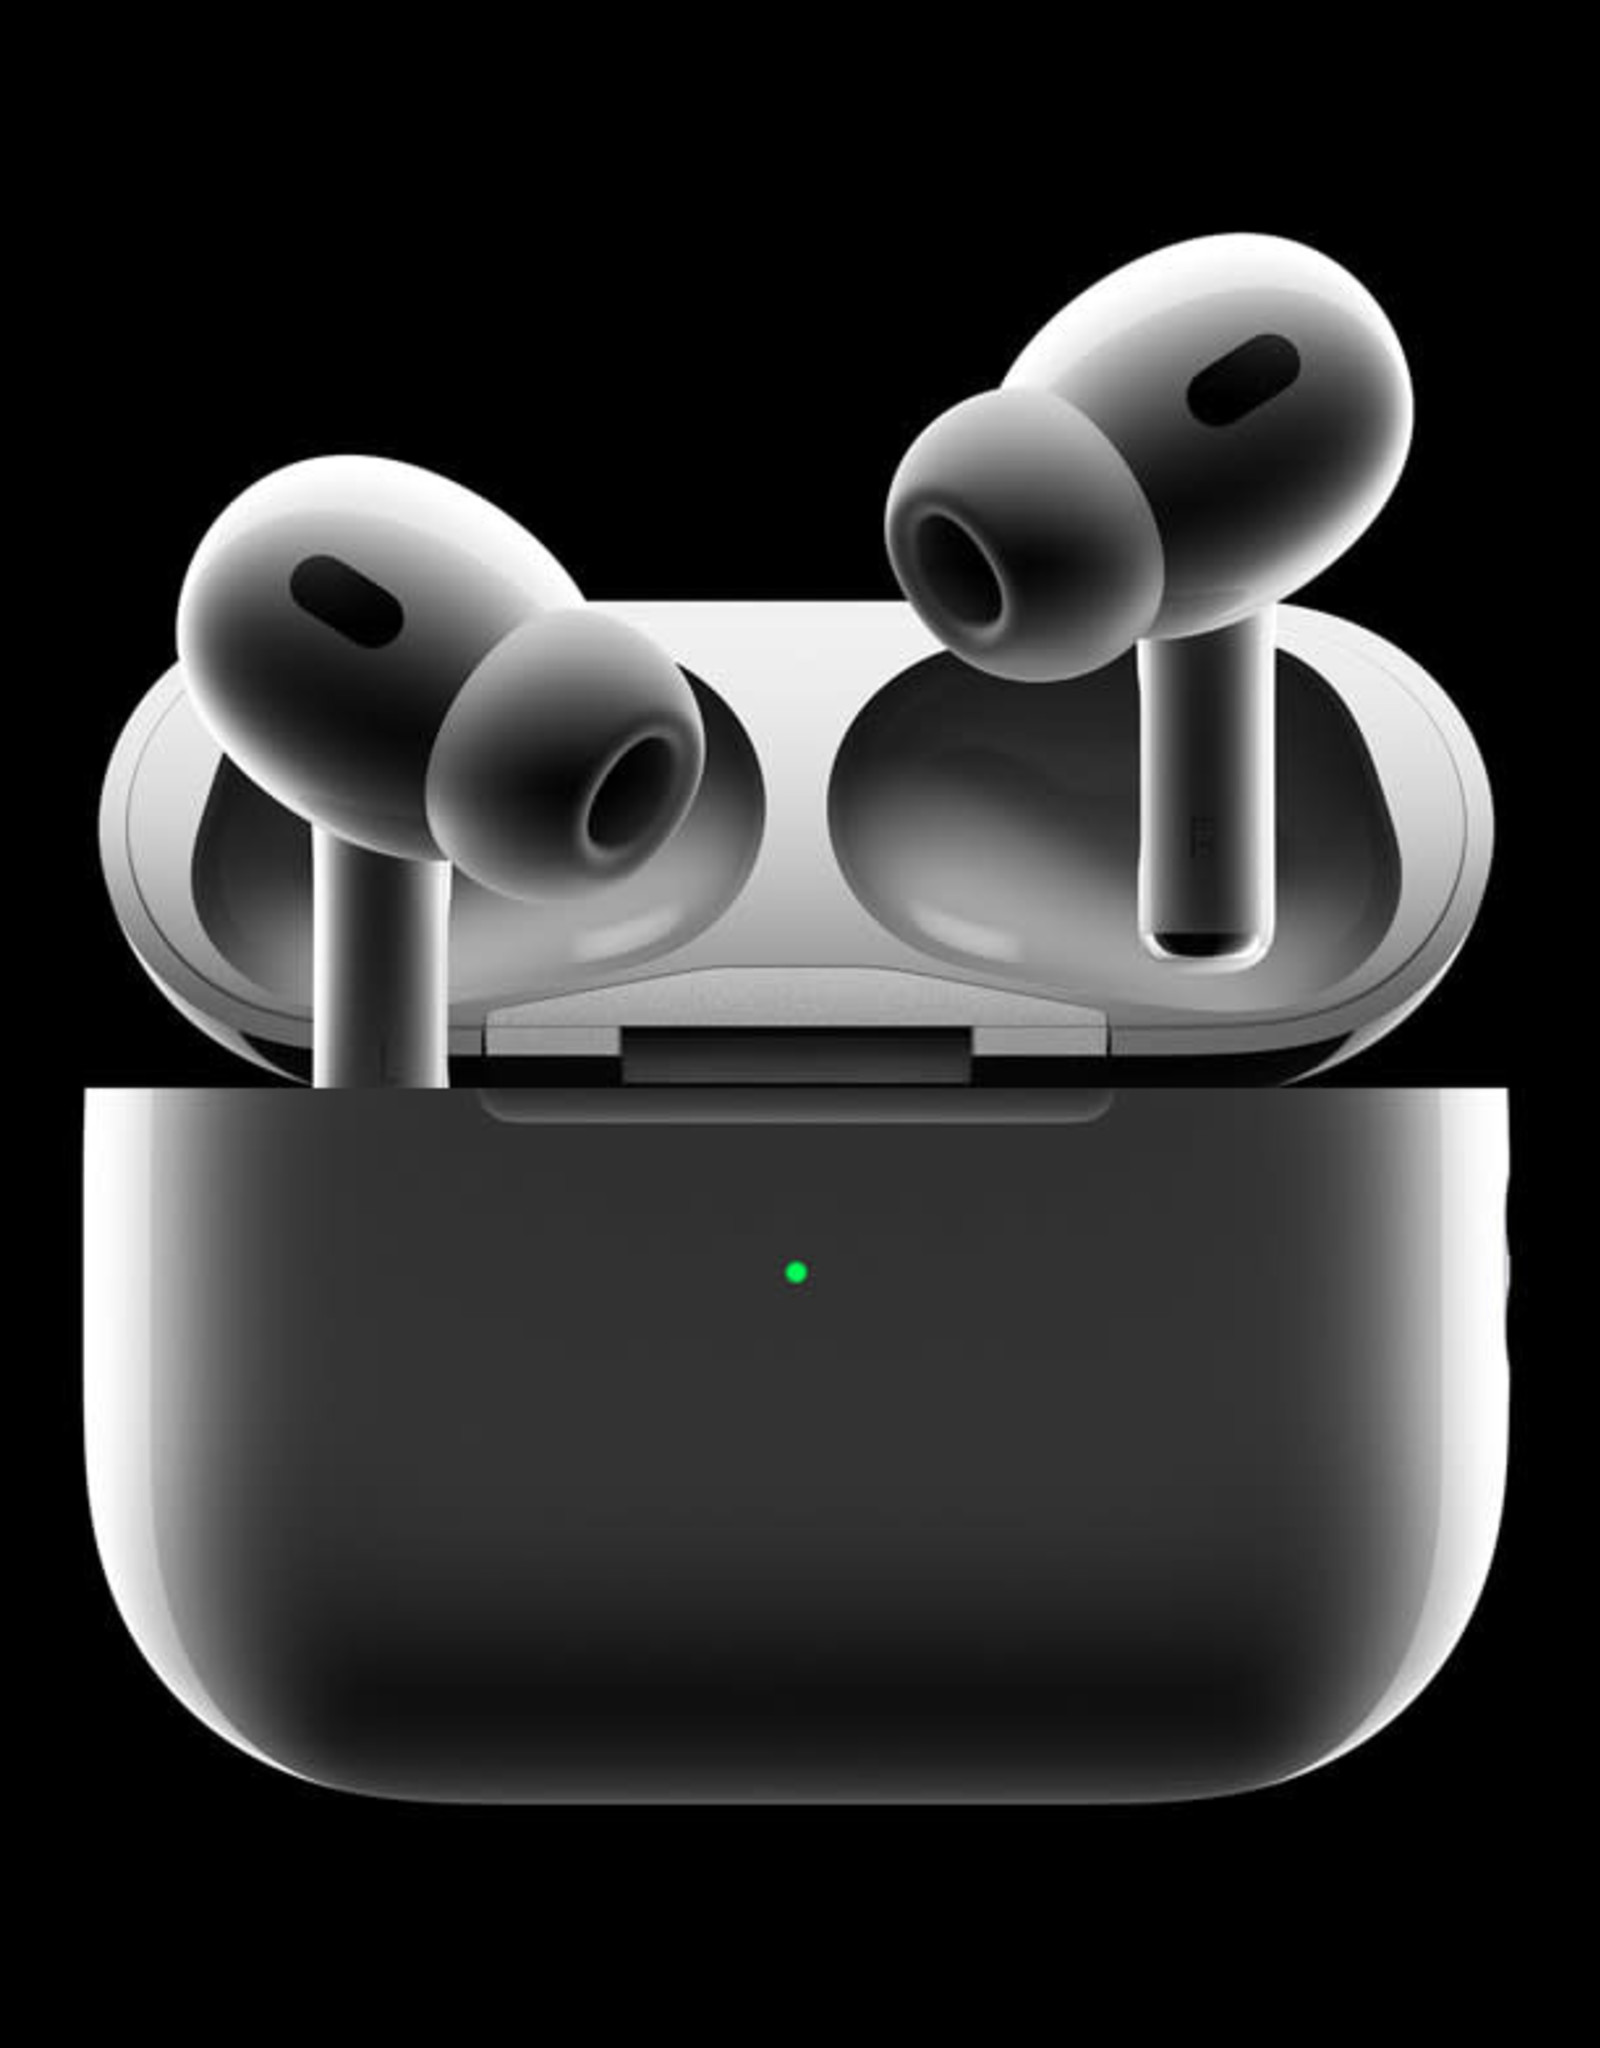 Apple Apple AirPods Pro 2 (2nd generation)